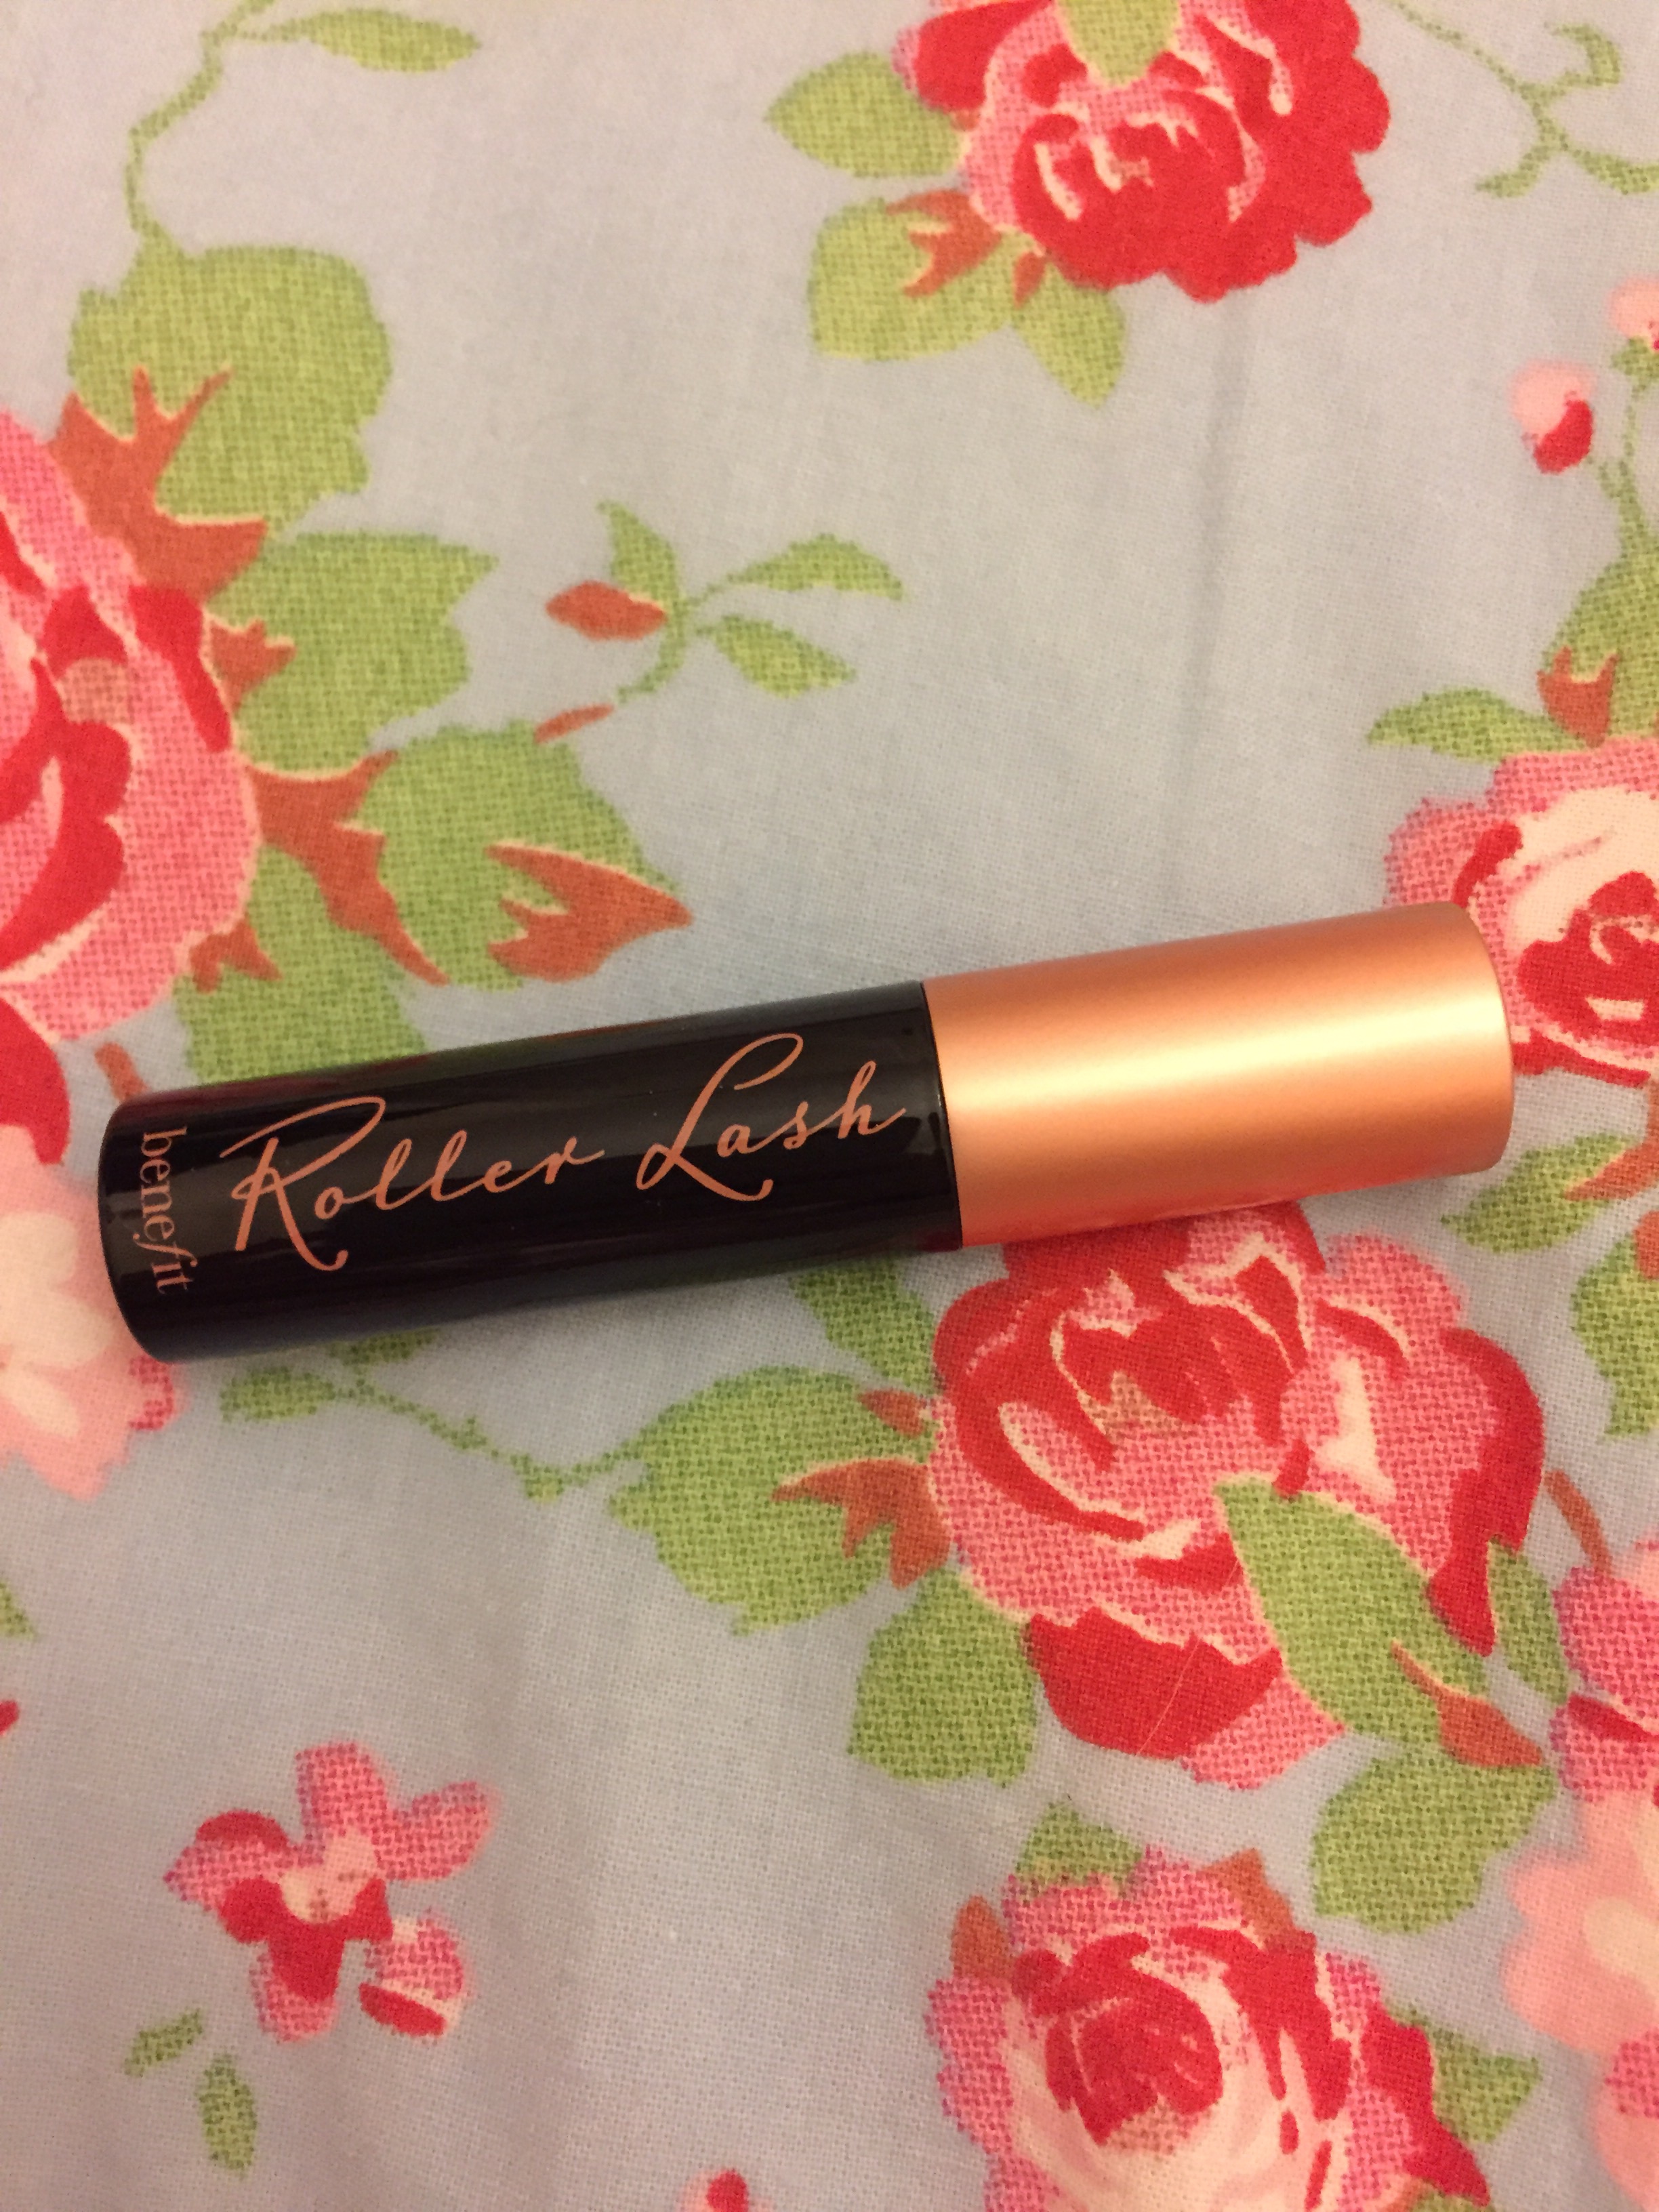 | Review! After Beauty by New Mascara (Before Benefit Roller pics!!) Gigi and Lash